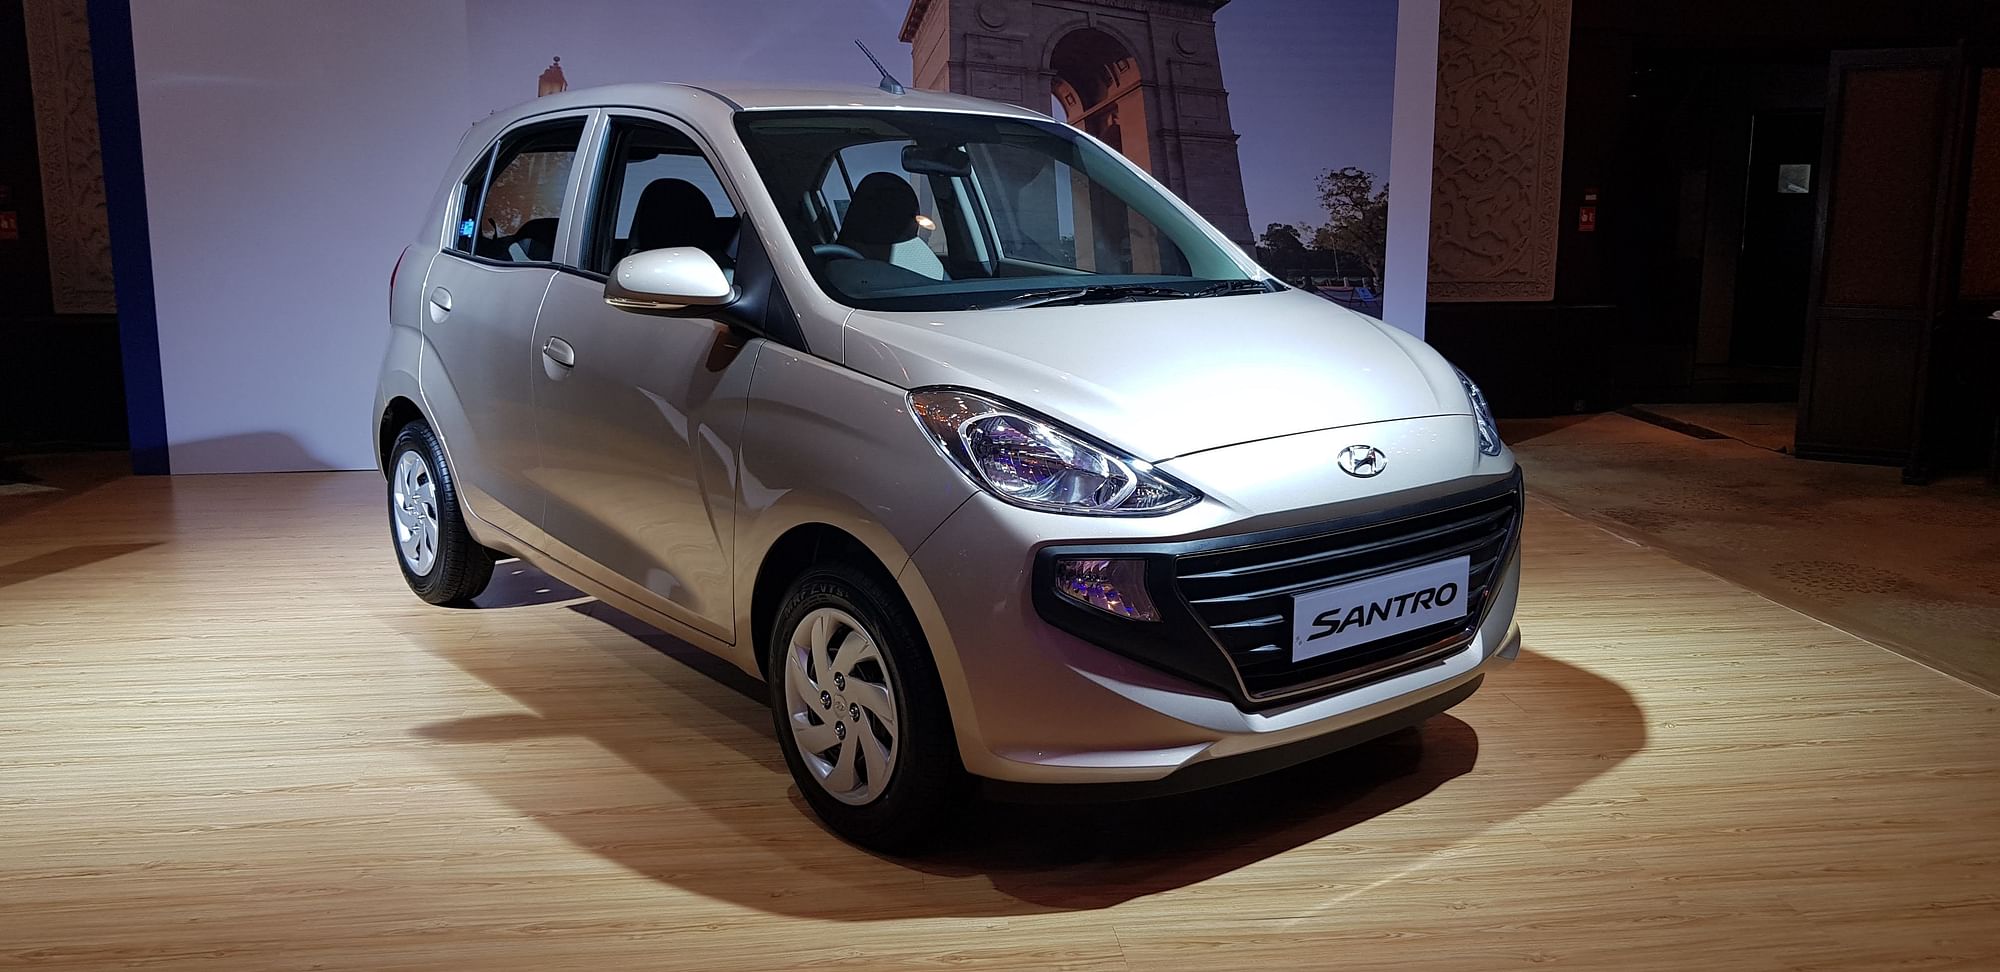 Hyundai Santro 2018 Launched Price, Variants and Features Detailed